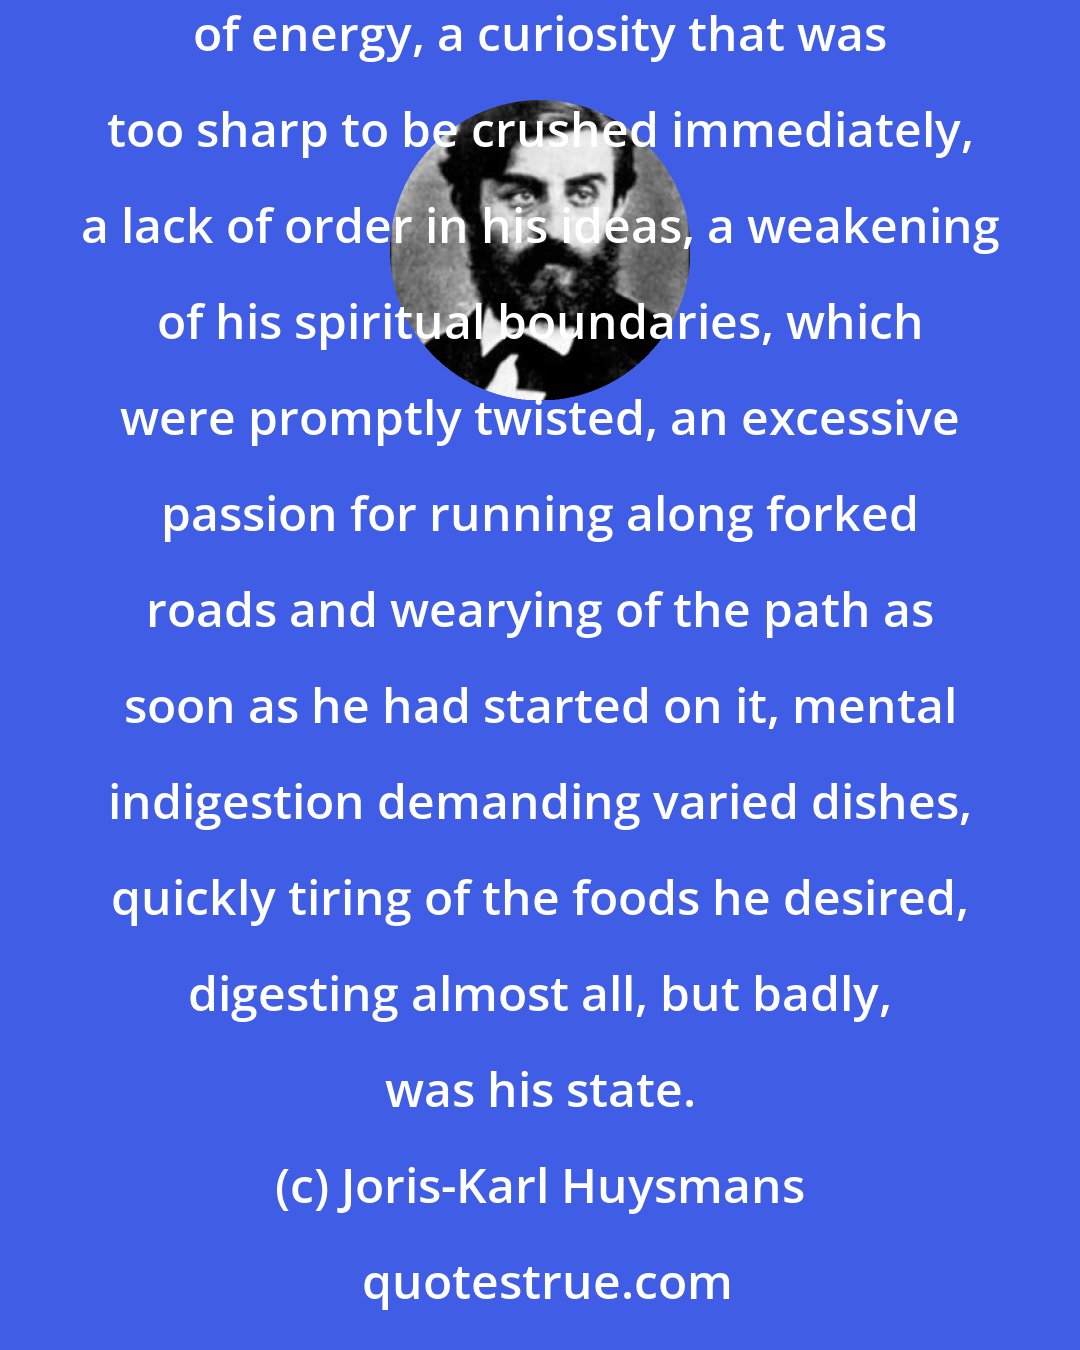 Joris-Karl Huysmans: In this game he had acquired a great deal of muddled knowledge, more than one approximation and less than one certitude. And absence of energy, a curiosity that was too sharp to be crushed immediately, a lack of order in his ideas, a weakening of his spiritual boundaries, which were promptly twisted, an excessive passion for running along forked roads and wearying of the path as soon as he had started on it, mental indigestion demanding varied dishes, quickly tiring of the foods he desired, digesting almost all, but badly, was his state.